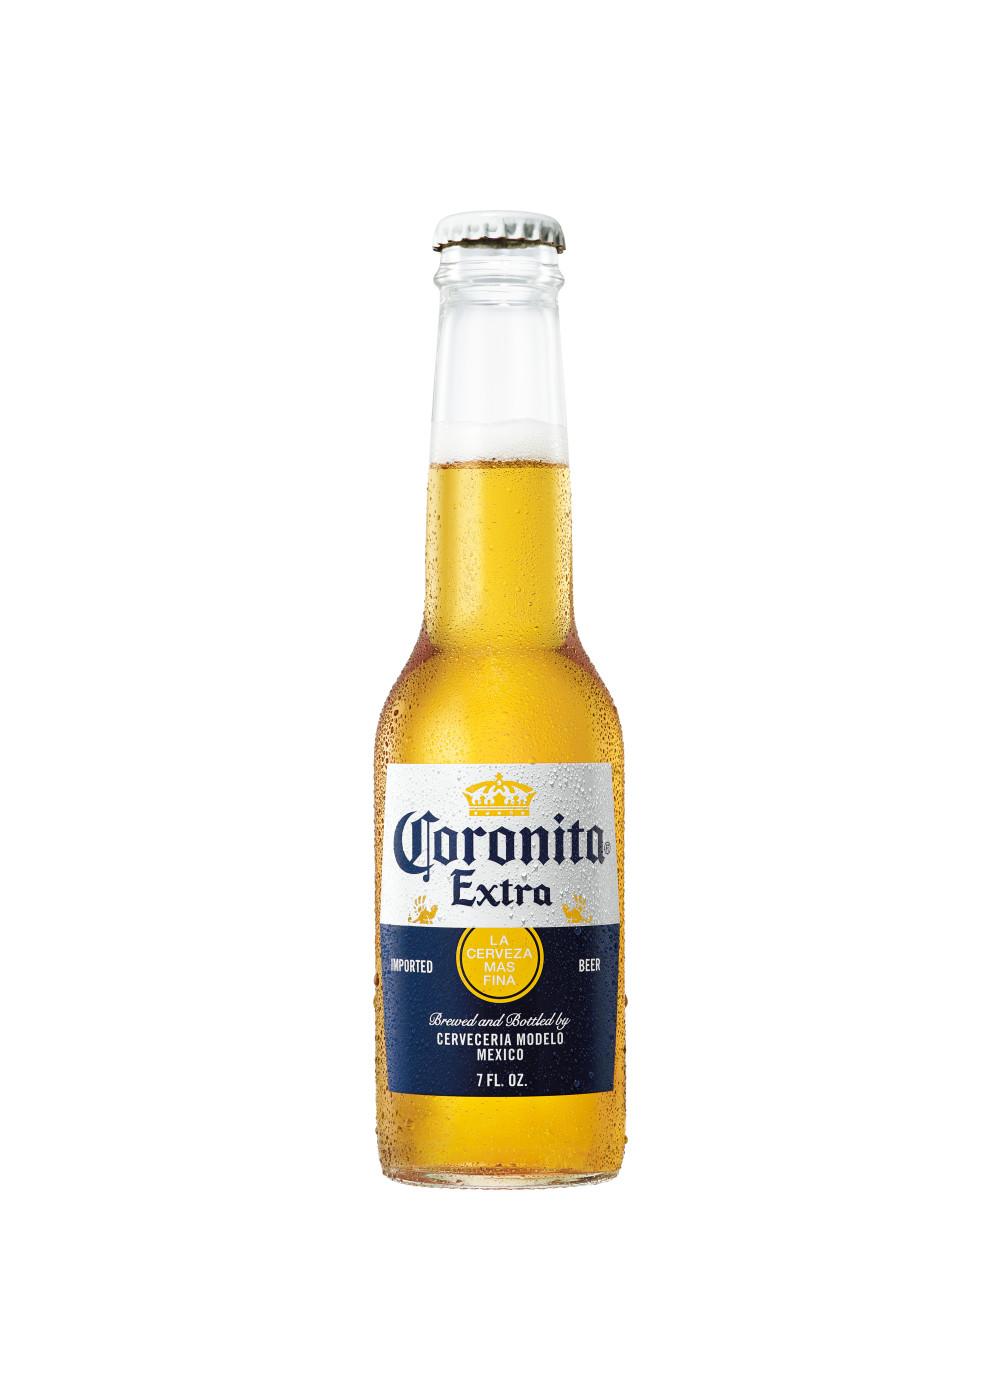 Corona Extra Coronita Mexican Lager Beer Bottle; image 1 of 3